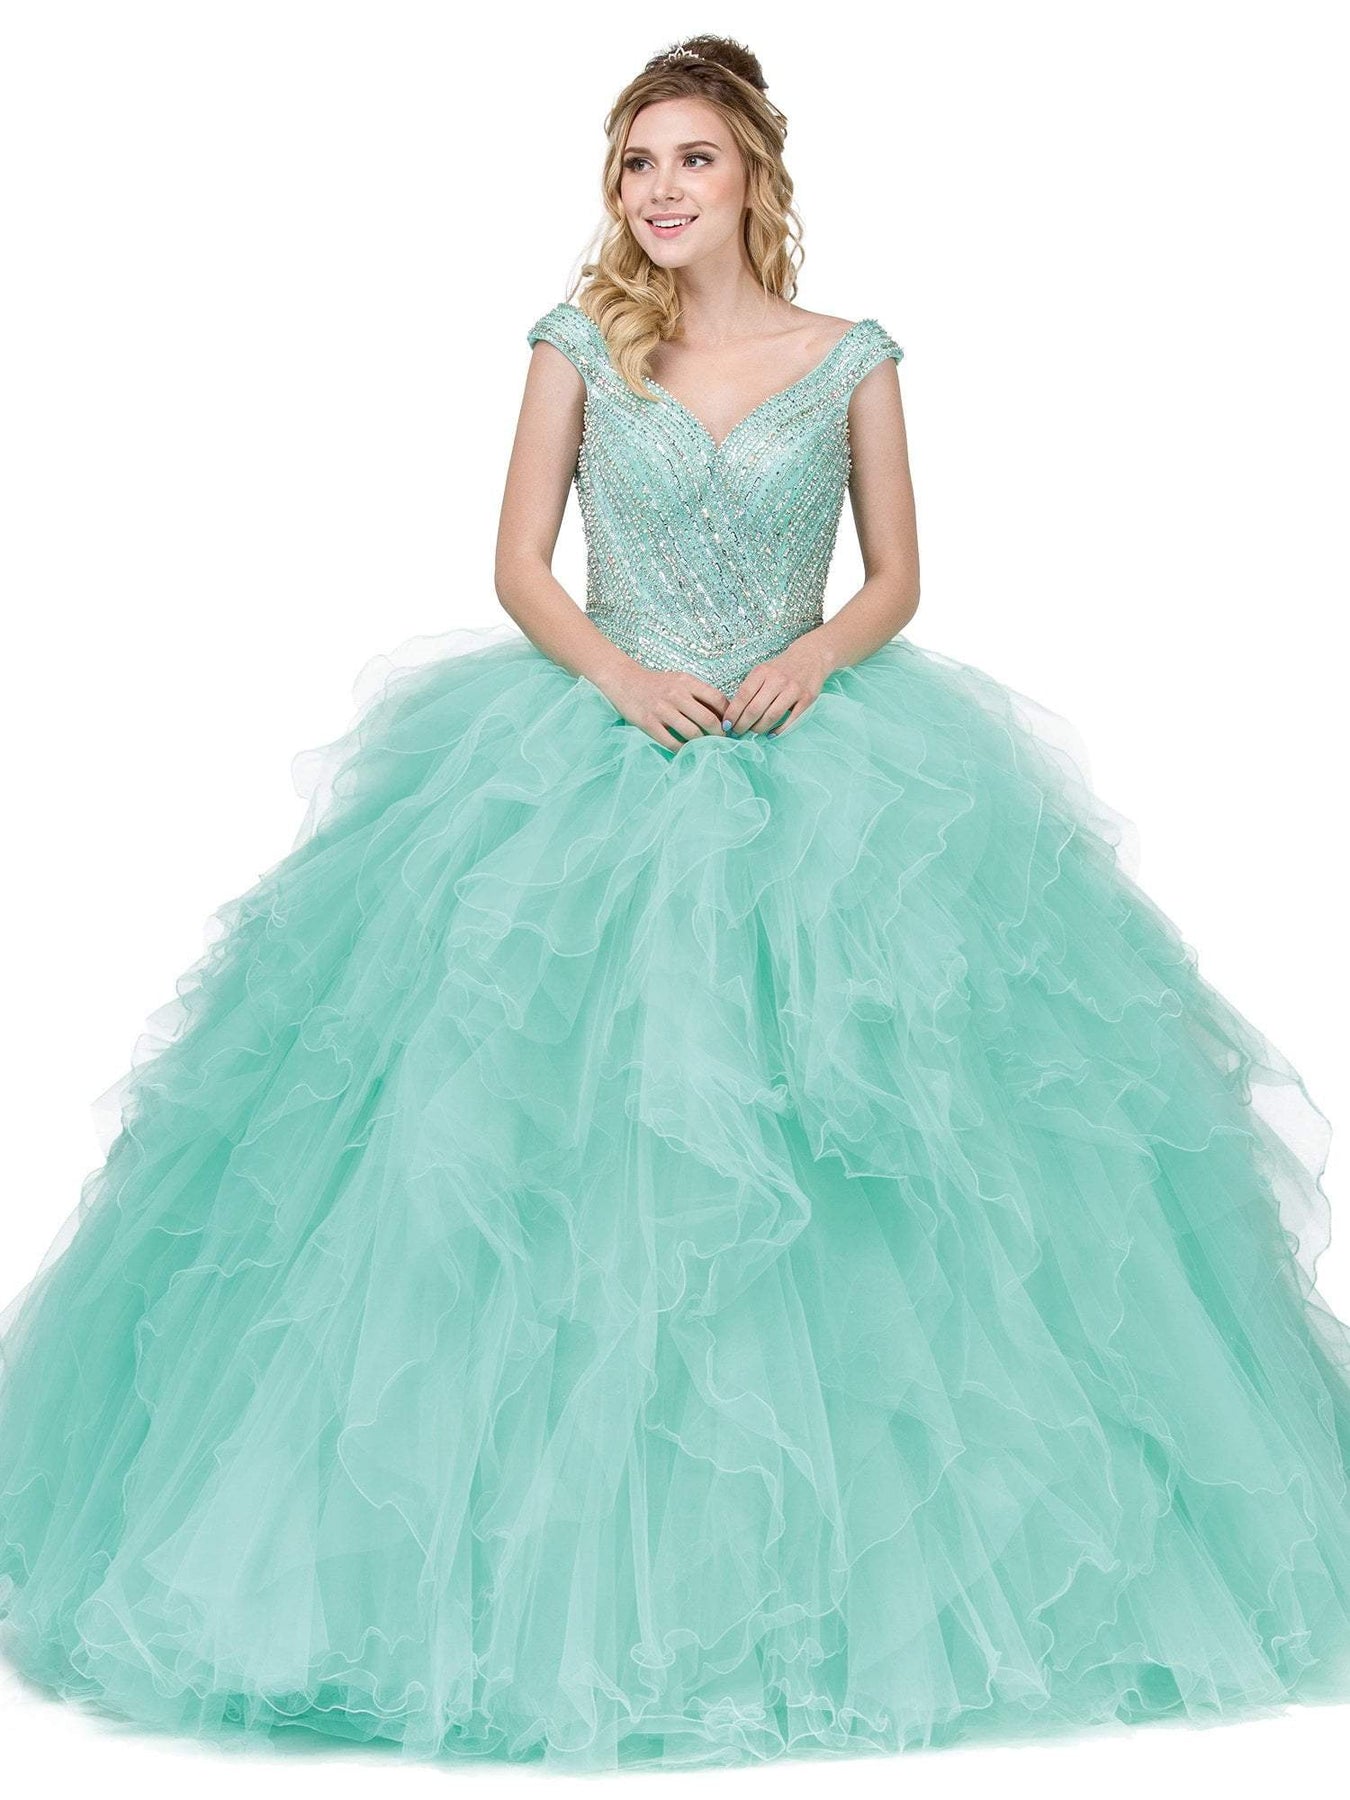 Dancing Queen - 1273 Crystal Adorned Cap Sleeve Quinceanera Ballgown Special Occasion Dress XS / Mint